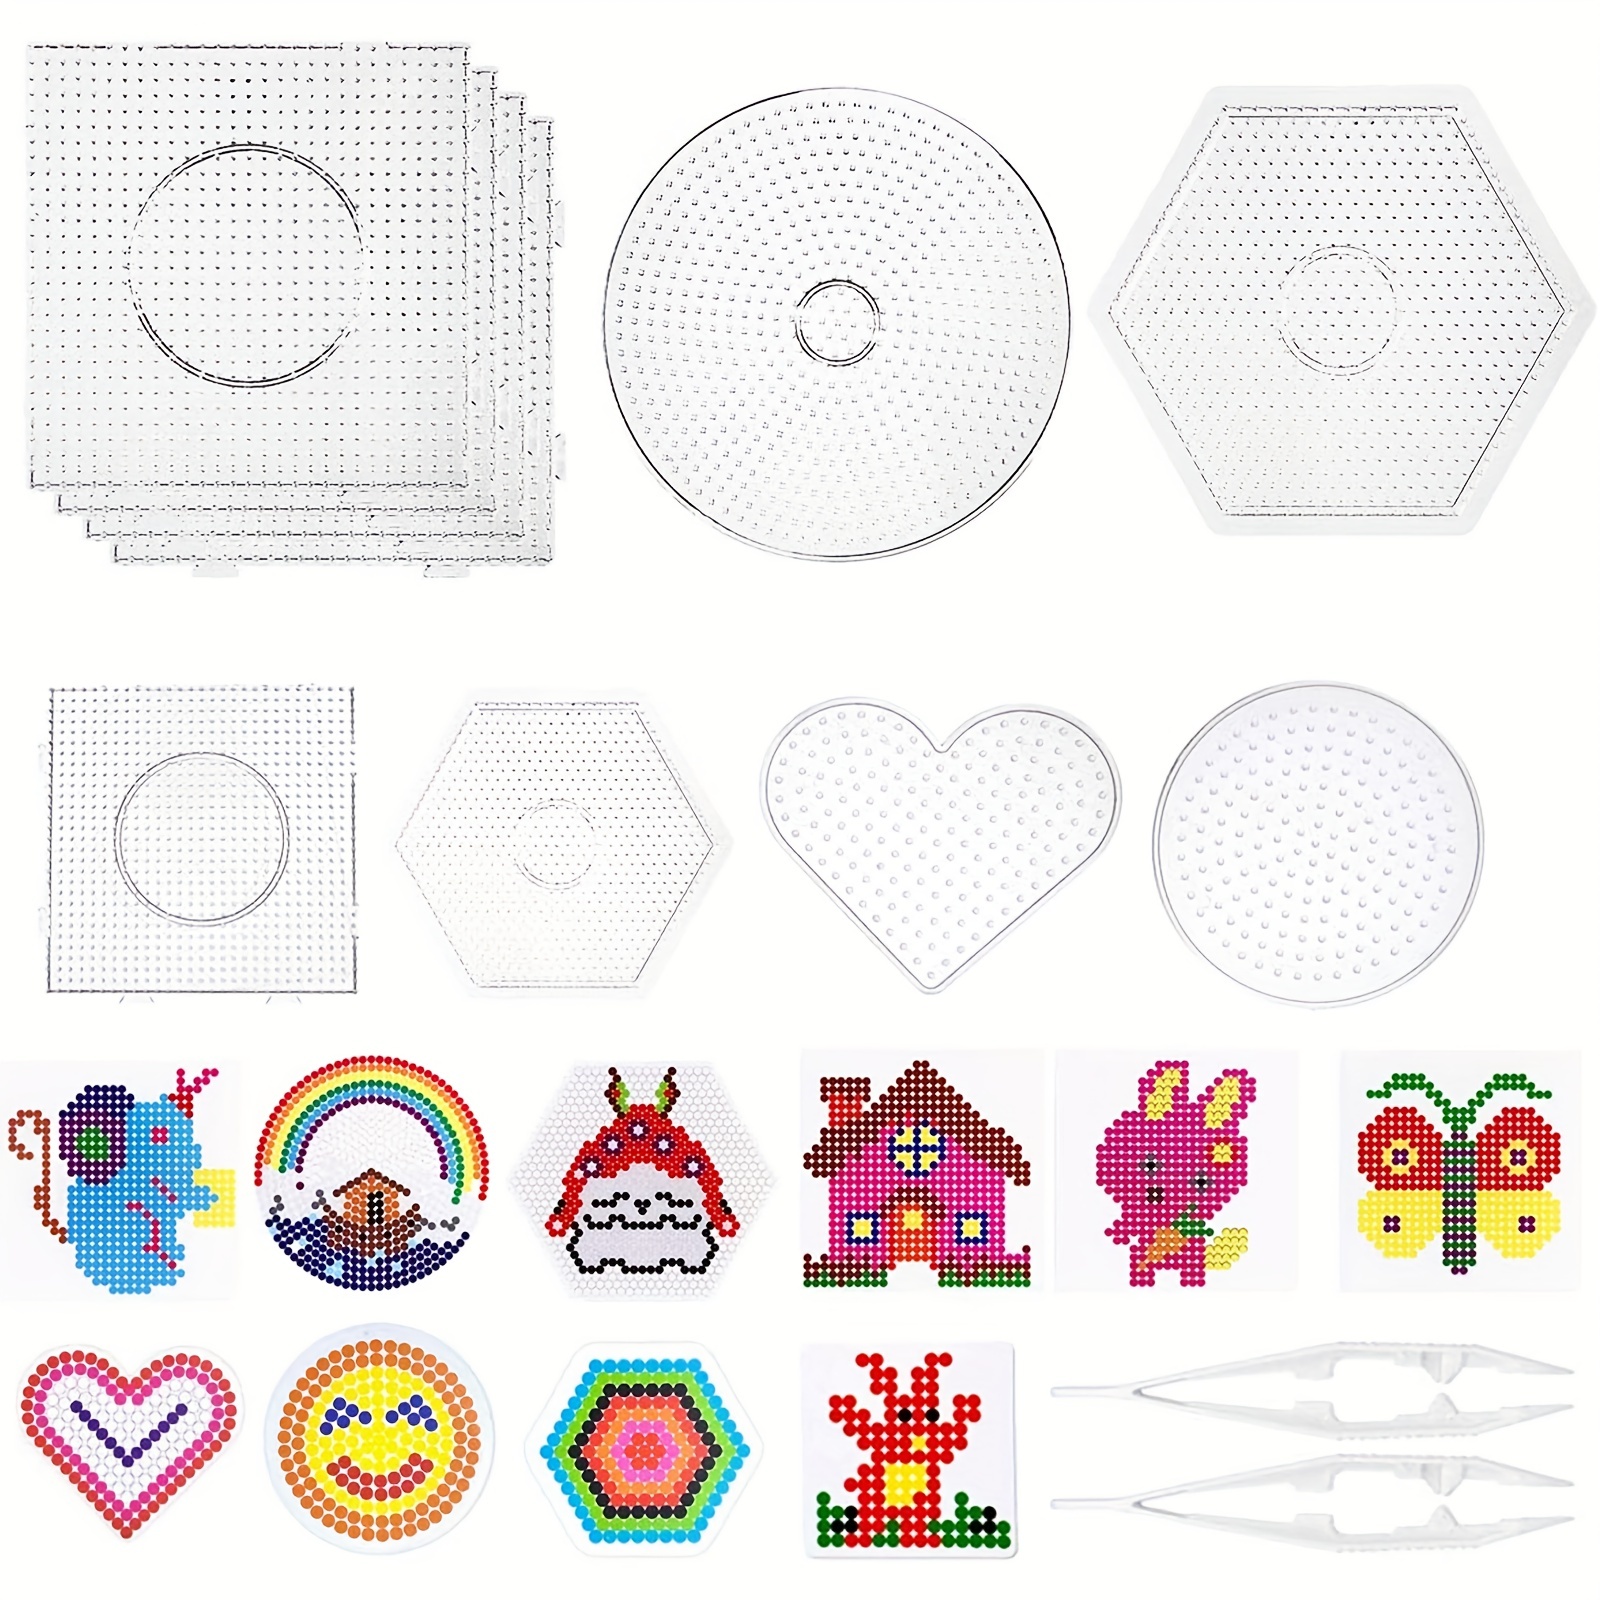 New 5mm Perler Beads Square Round Hexagon Pegboard 3D Puzzle